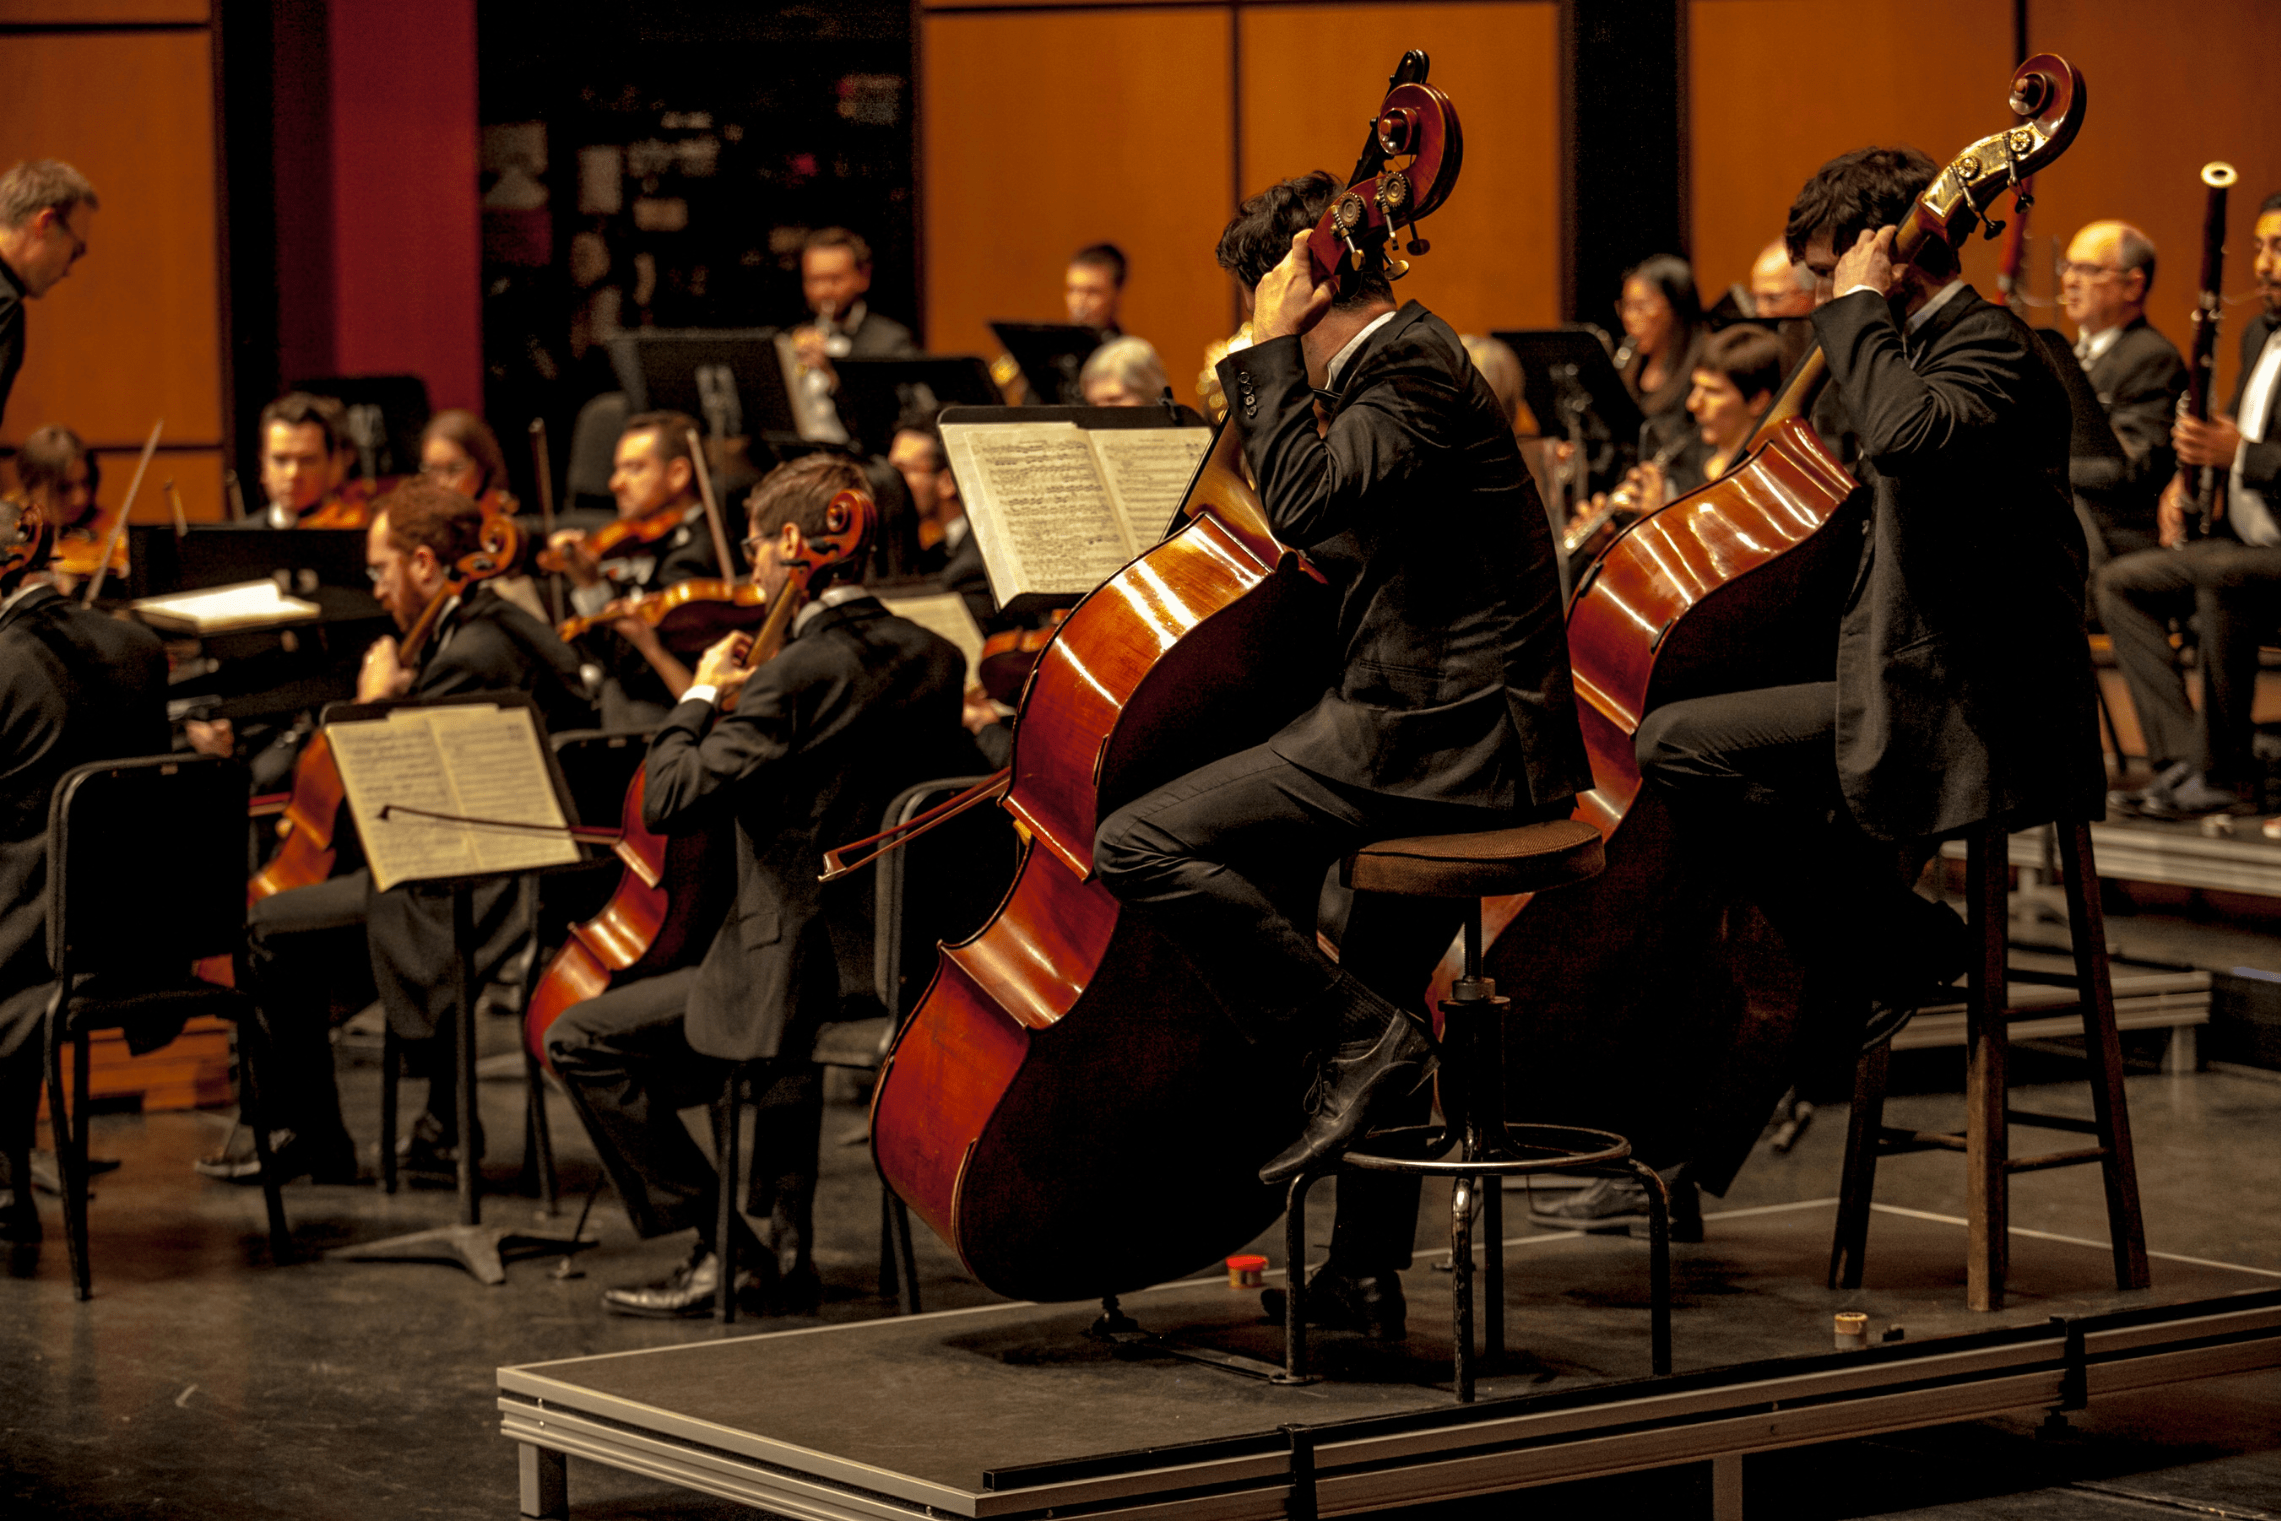 An image of an orchestra on stage.